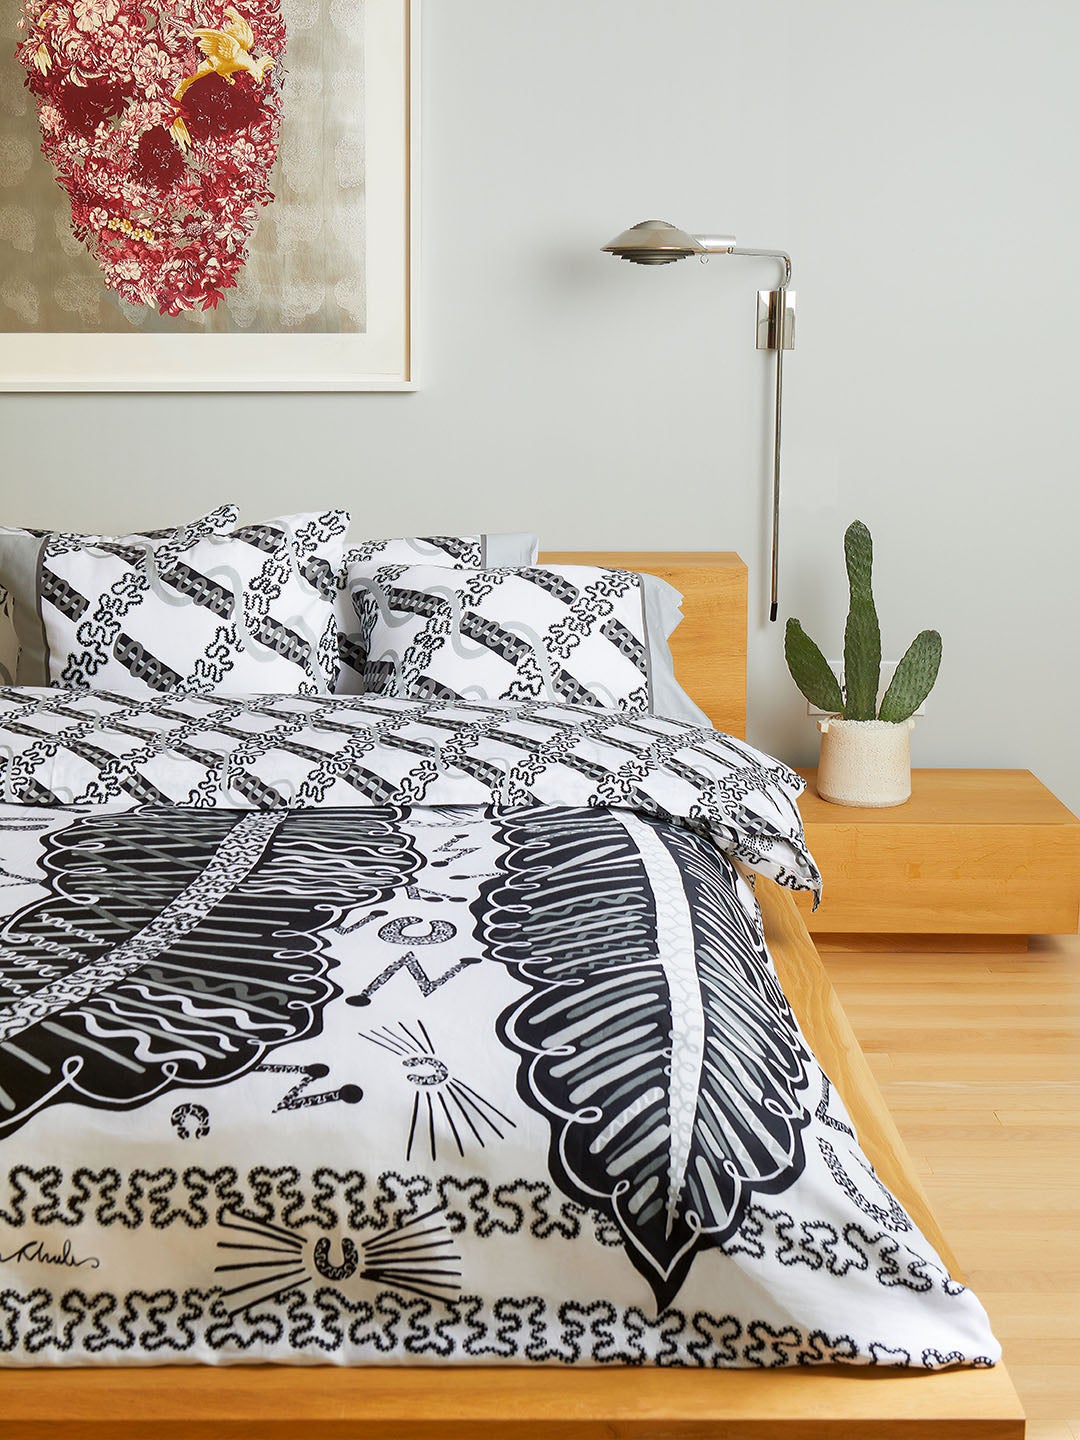 Bed with black and white bedding and a cactus on a nightstand